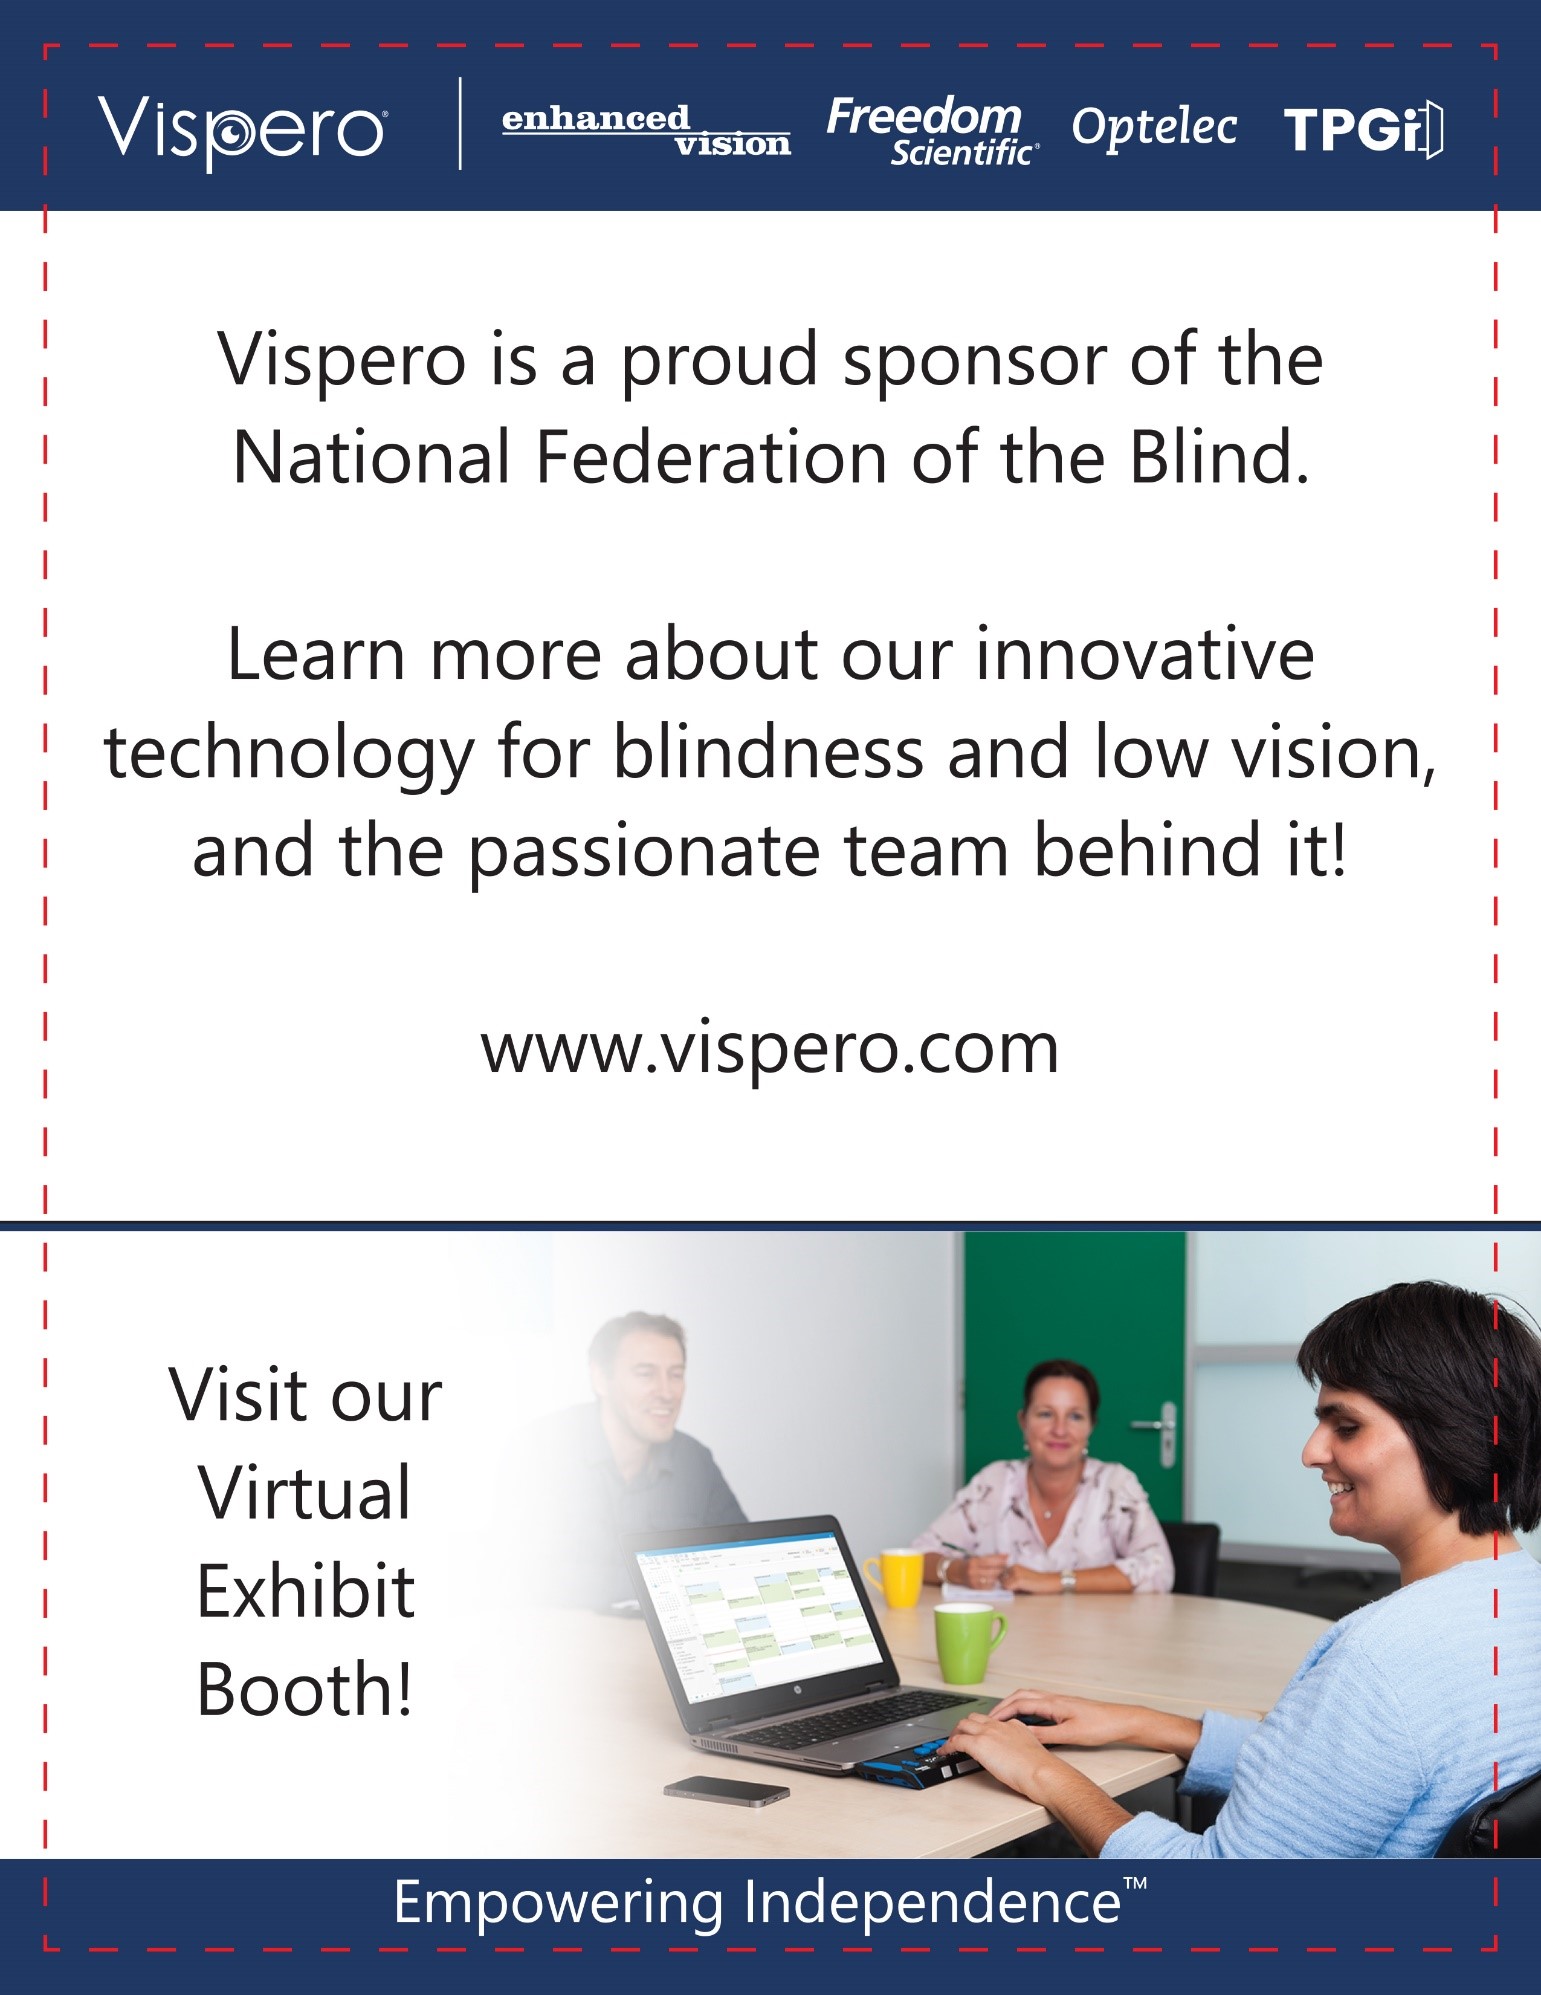 Vispero | Enhanced Vision, Freedom Scientific, Optelec, TPGi Vispero is a proud sponsor of the National Federation of the Blind. Learn more about our innovative technology for blindness and low vision, and the passionate team behind it! Visit our virtual exhibit booth! www.vispero.com. Empowering Independence.